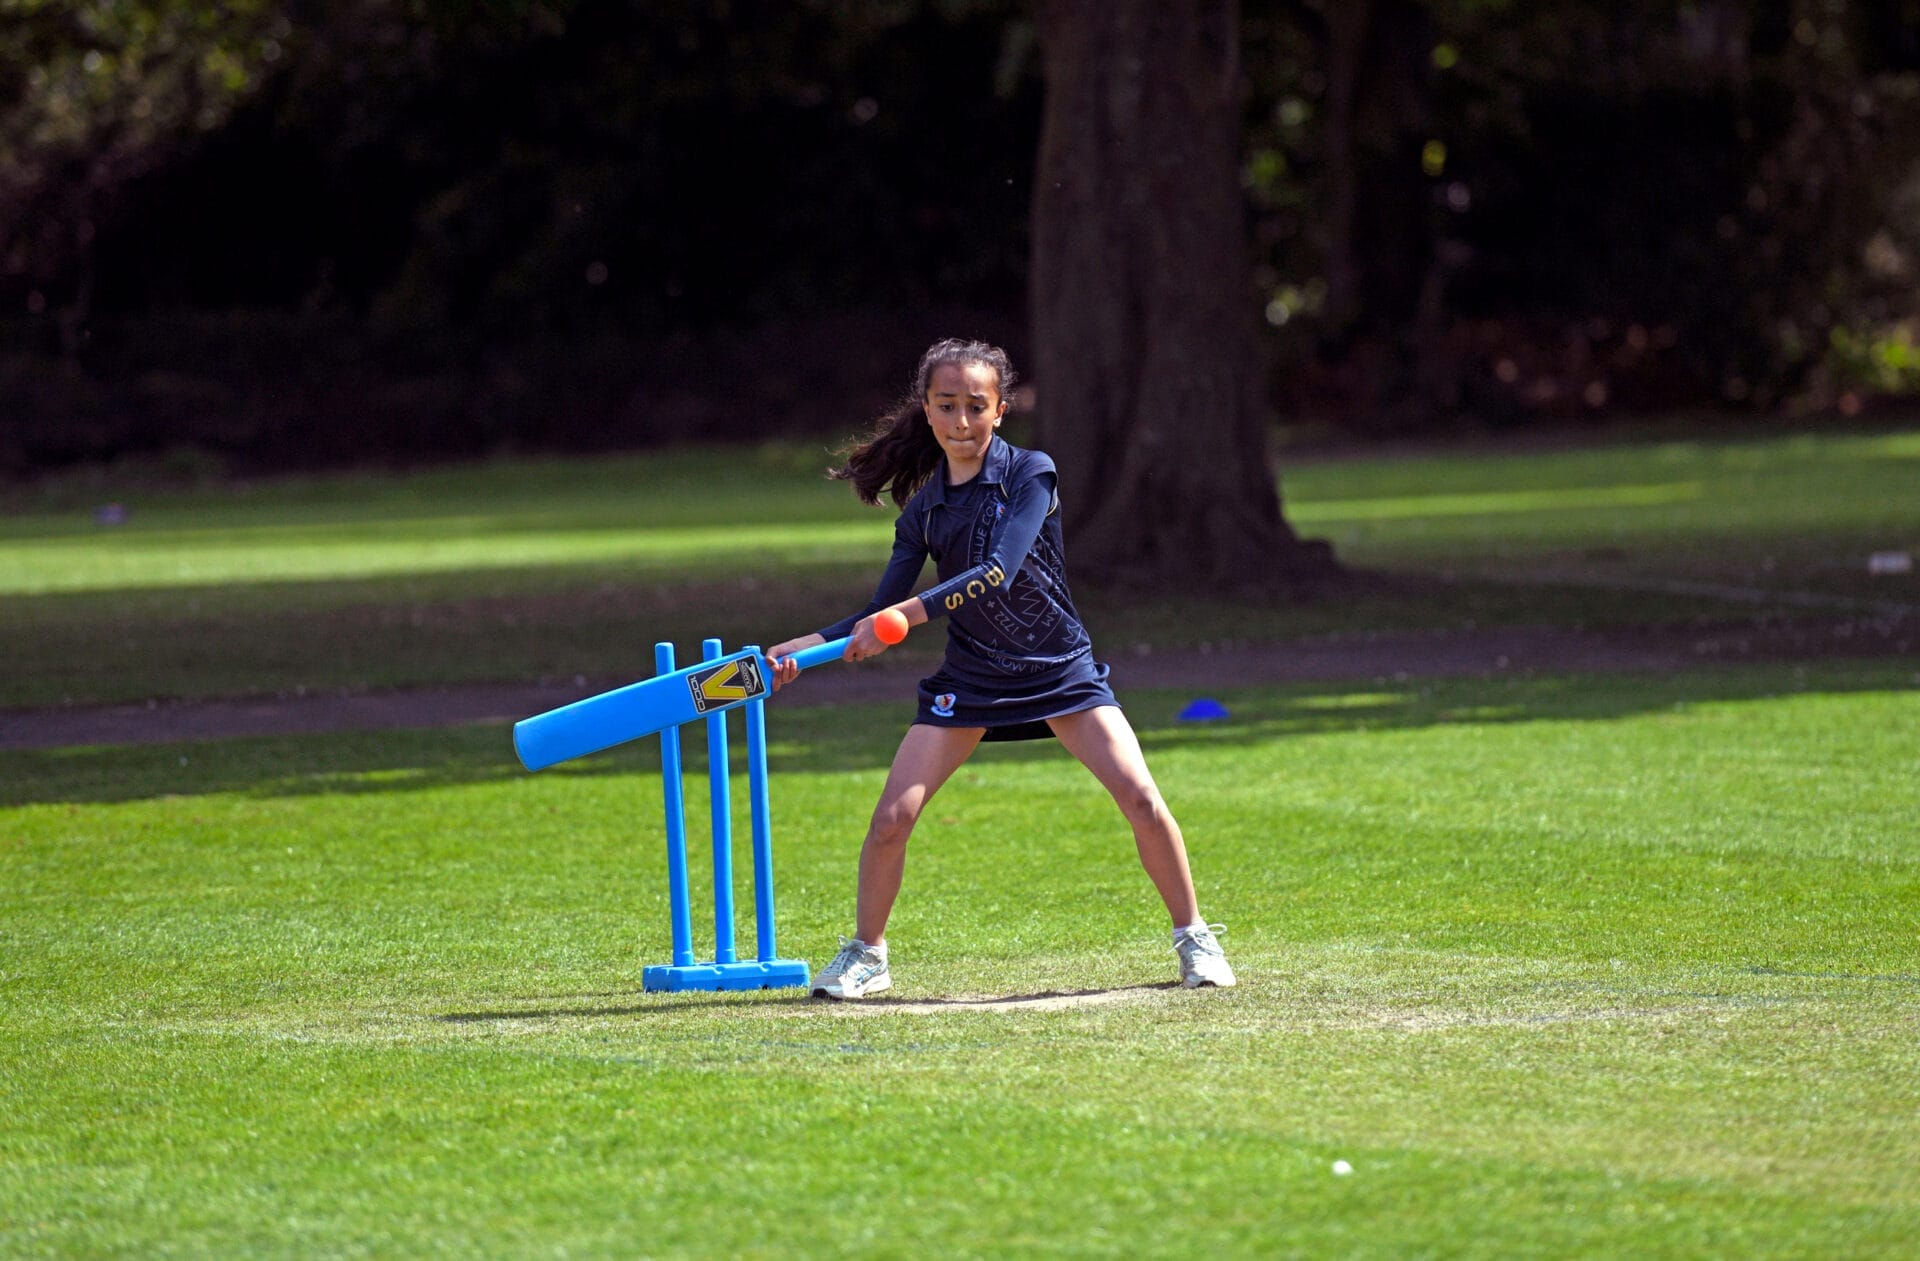 A girl swings to hit the ball in a cricket match.